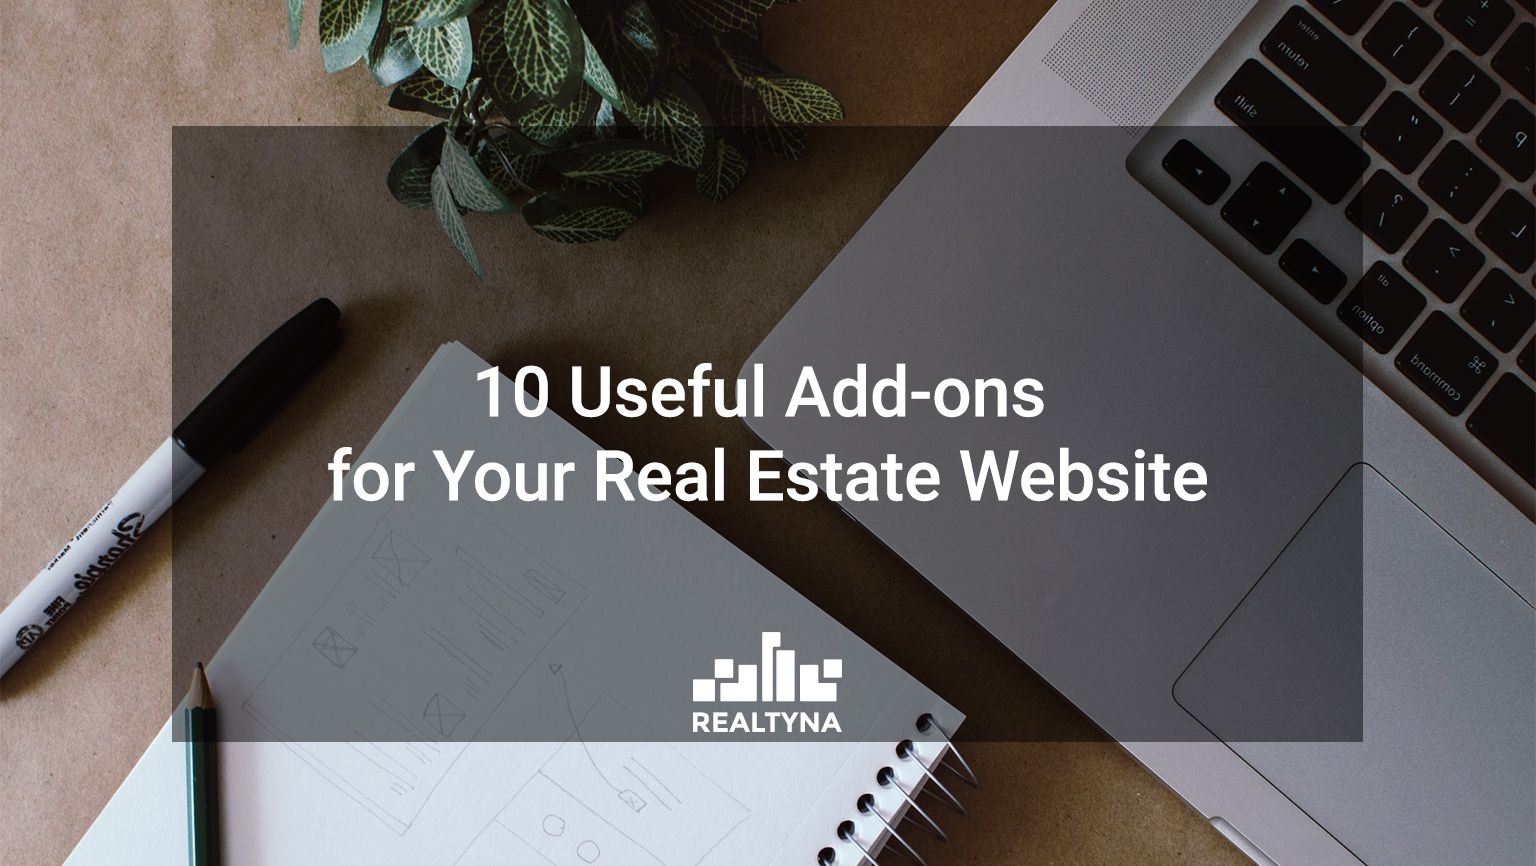 10 Useful Add-ons for Your Real Estate Website